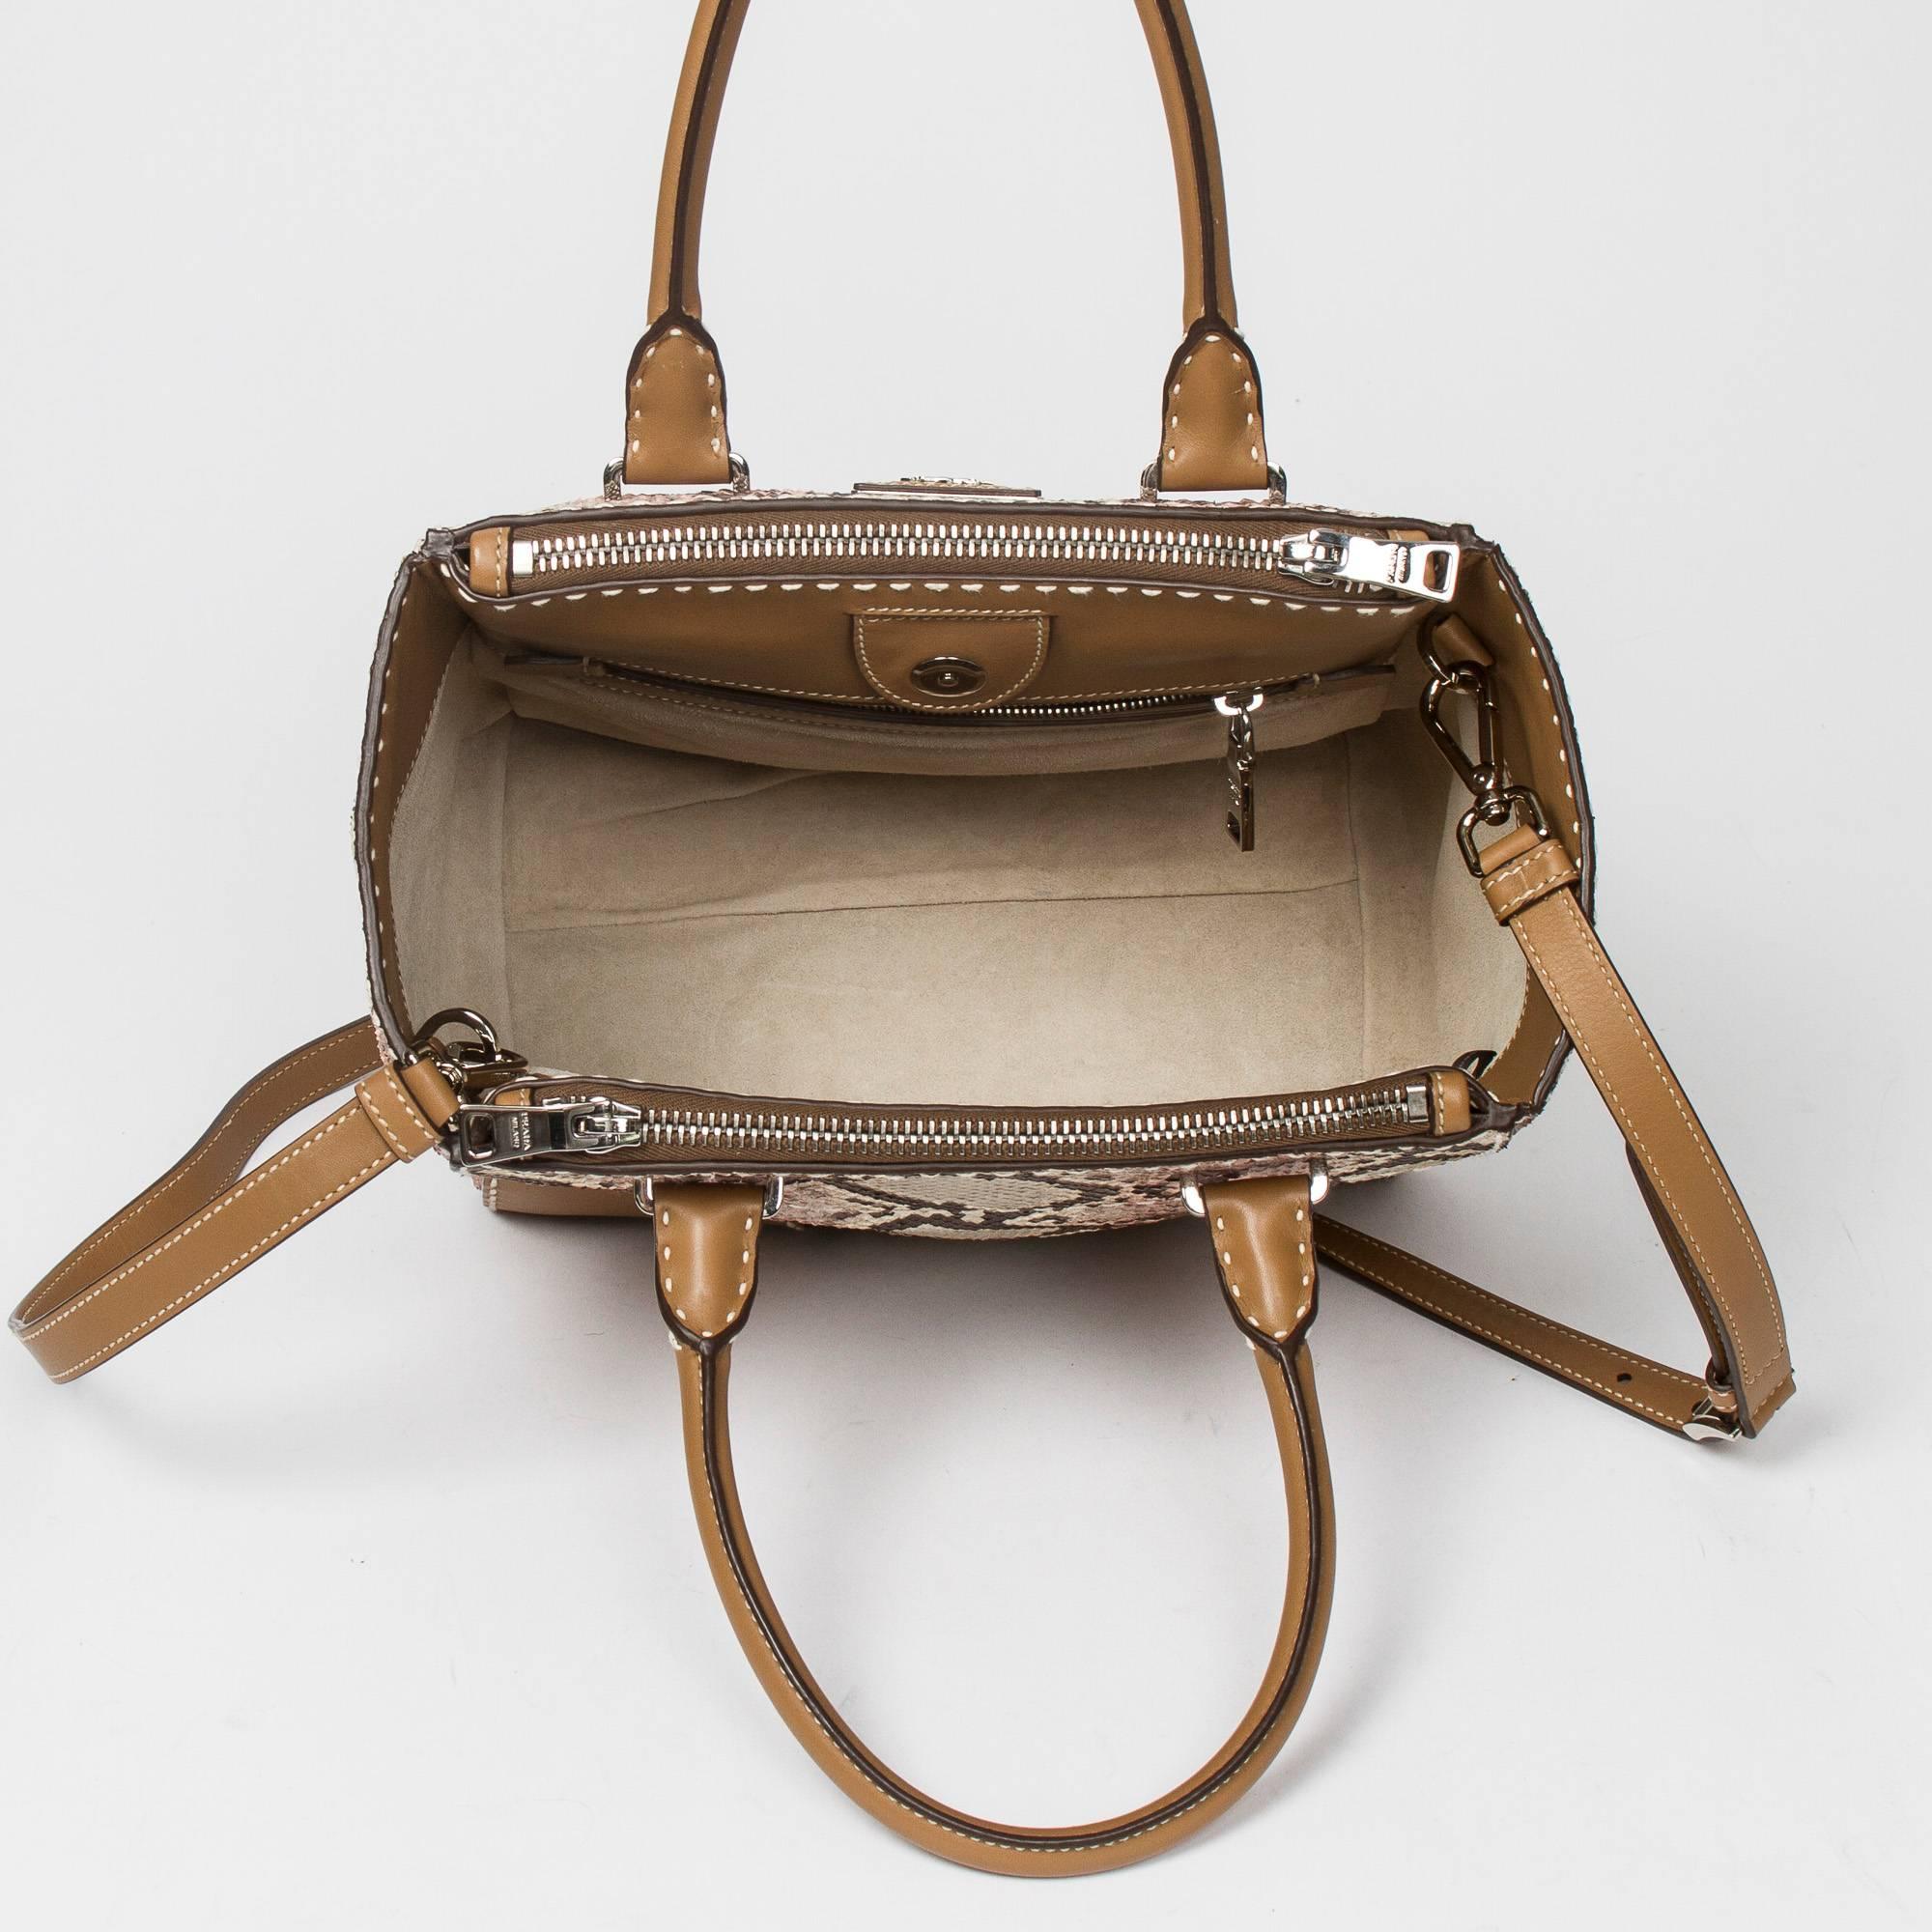 Prada Tote in Beige/Ivory/Brown python leather 2